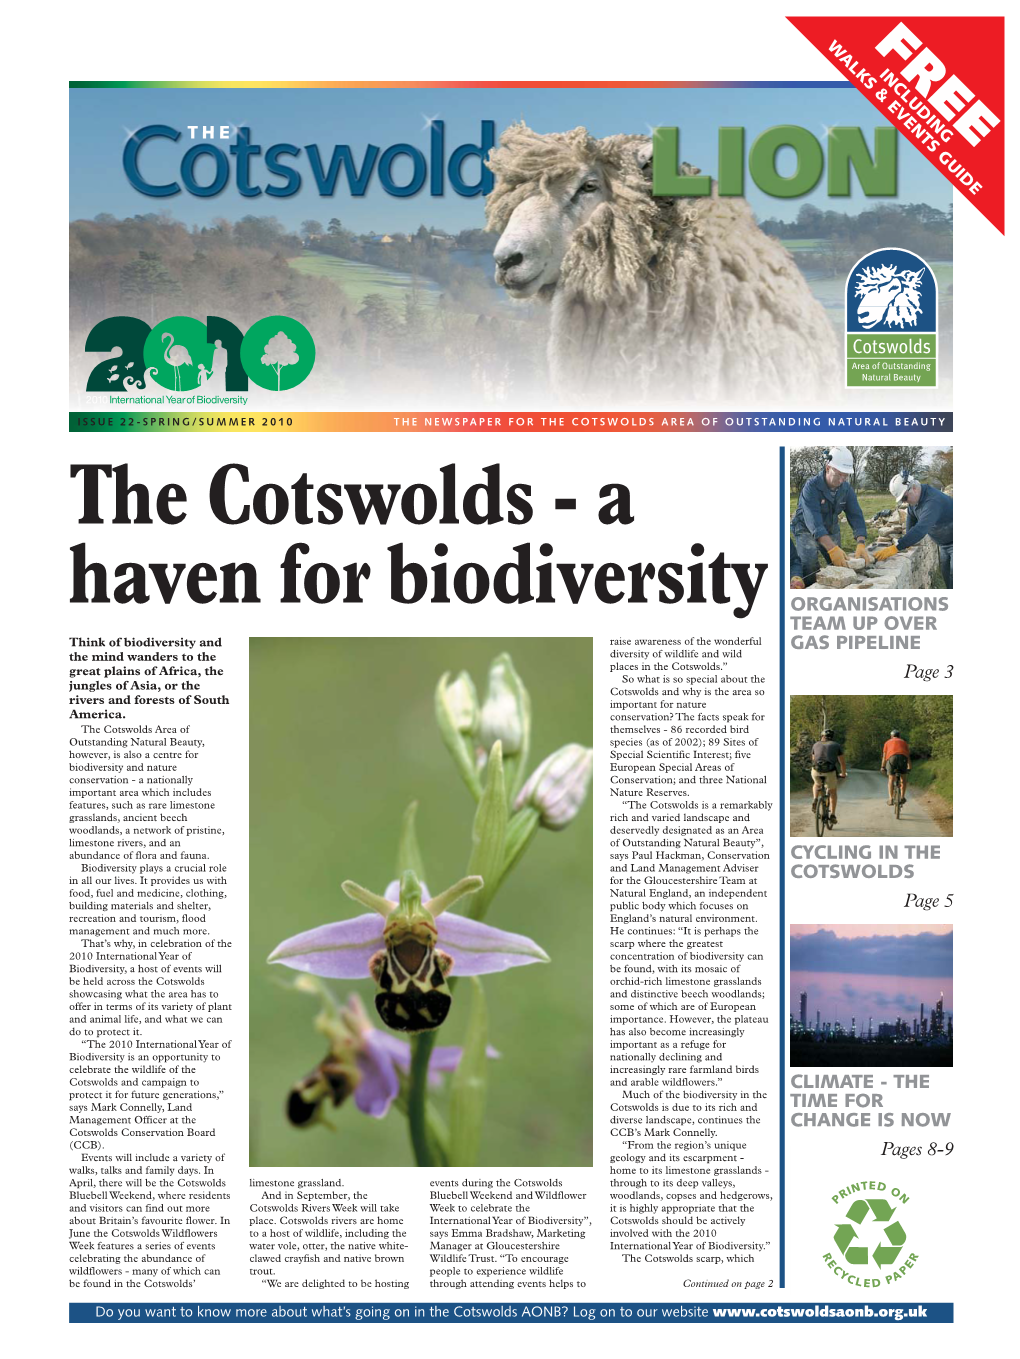 ORGANISATIONS TEAM up OVER GAS PIPELINE Page 3 CYCLING in the COTSWOLDS Page 5 CLIMATE